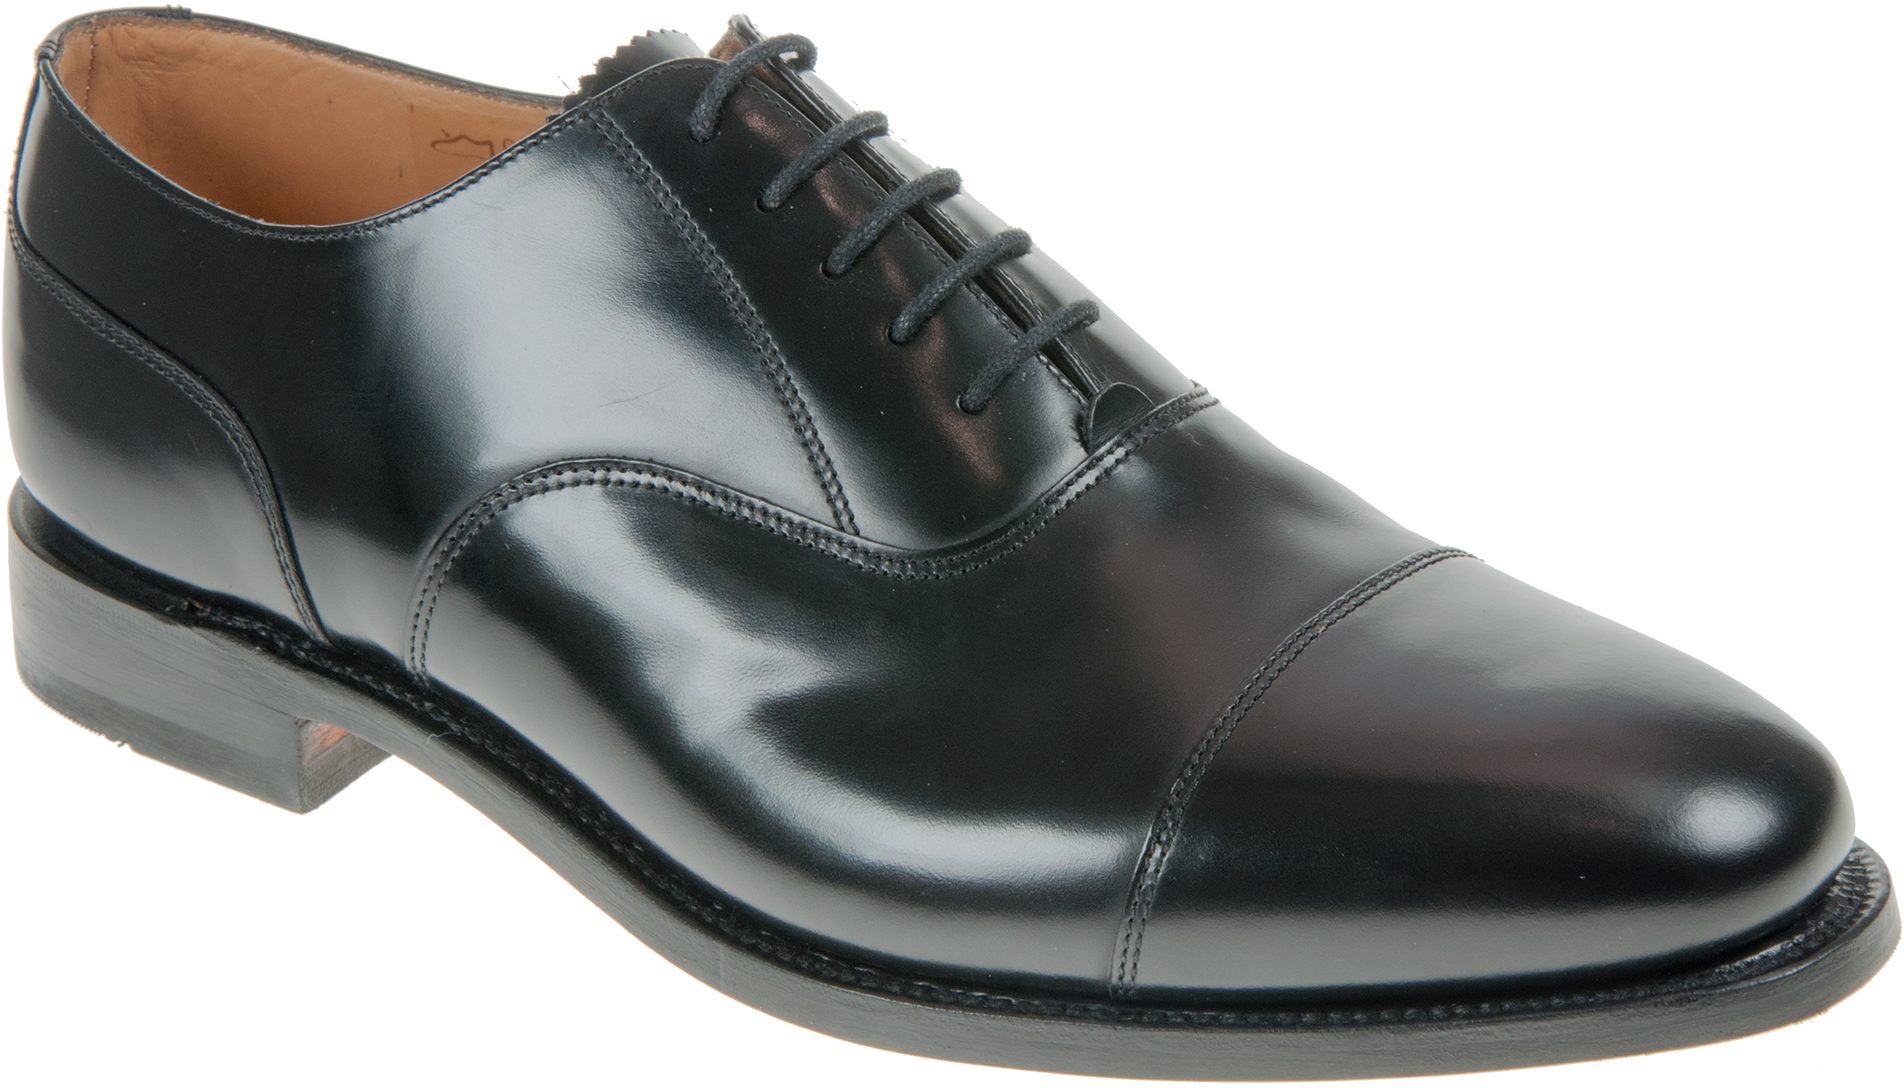 Loake 200 Black - Formal Shoes - Humphries Shoes